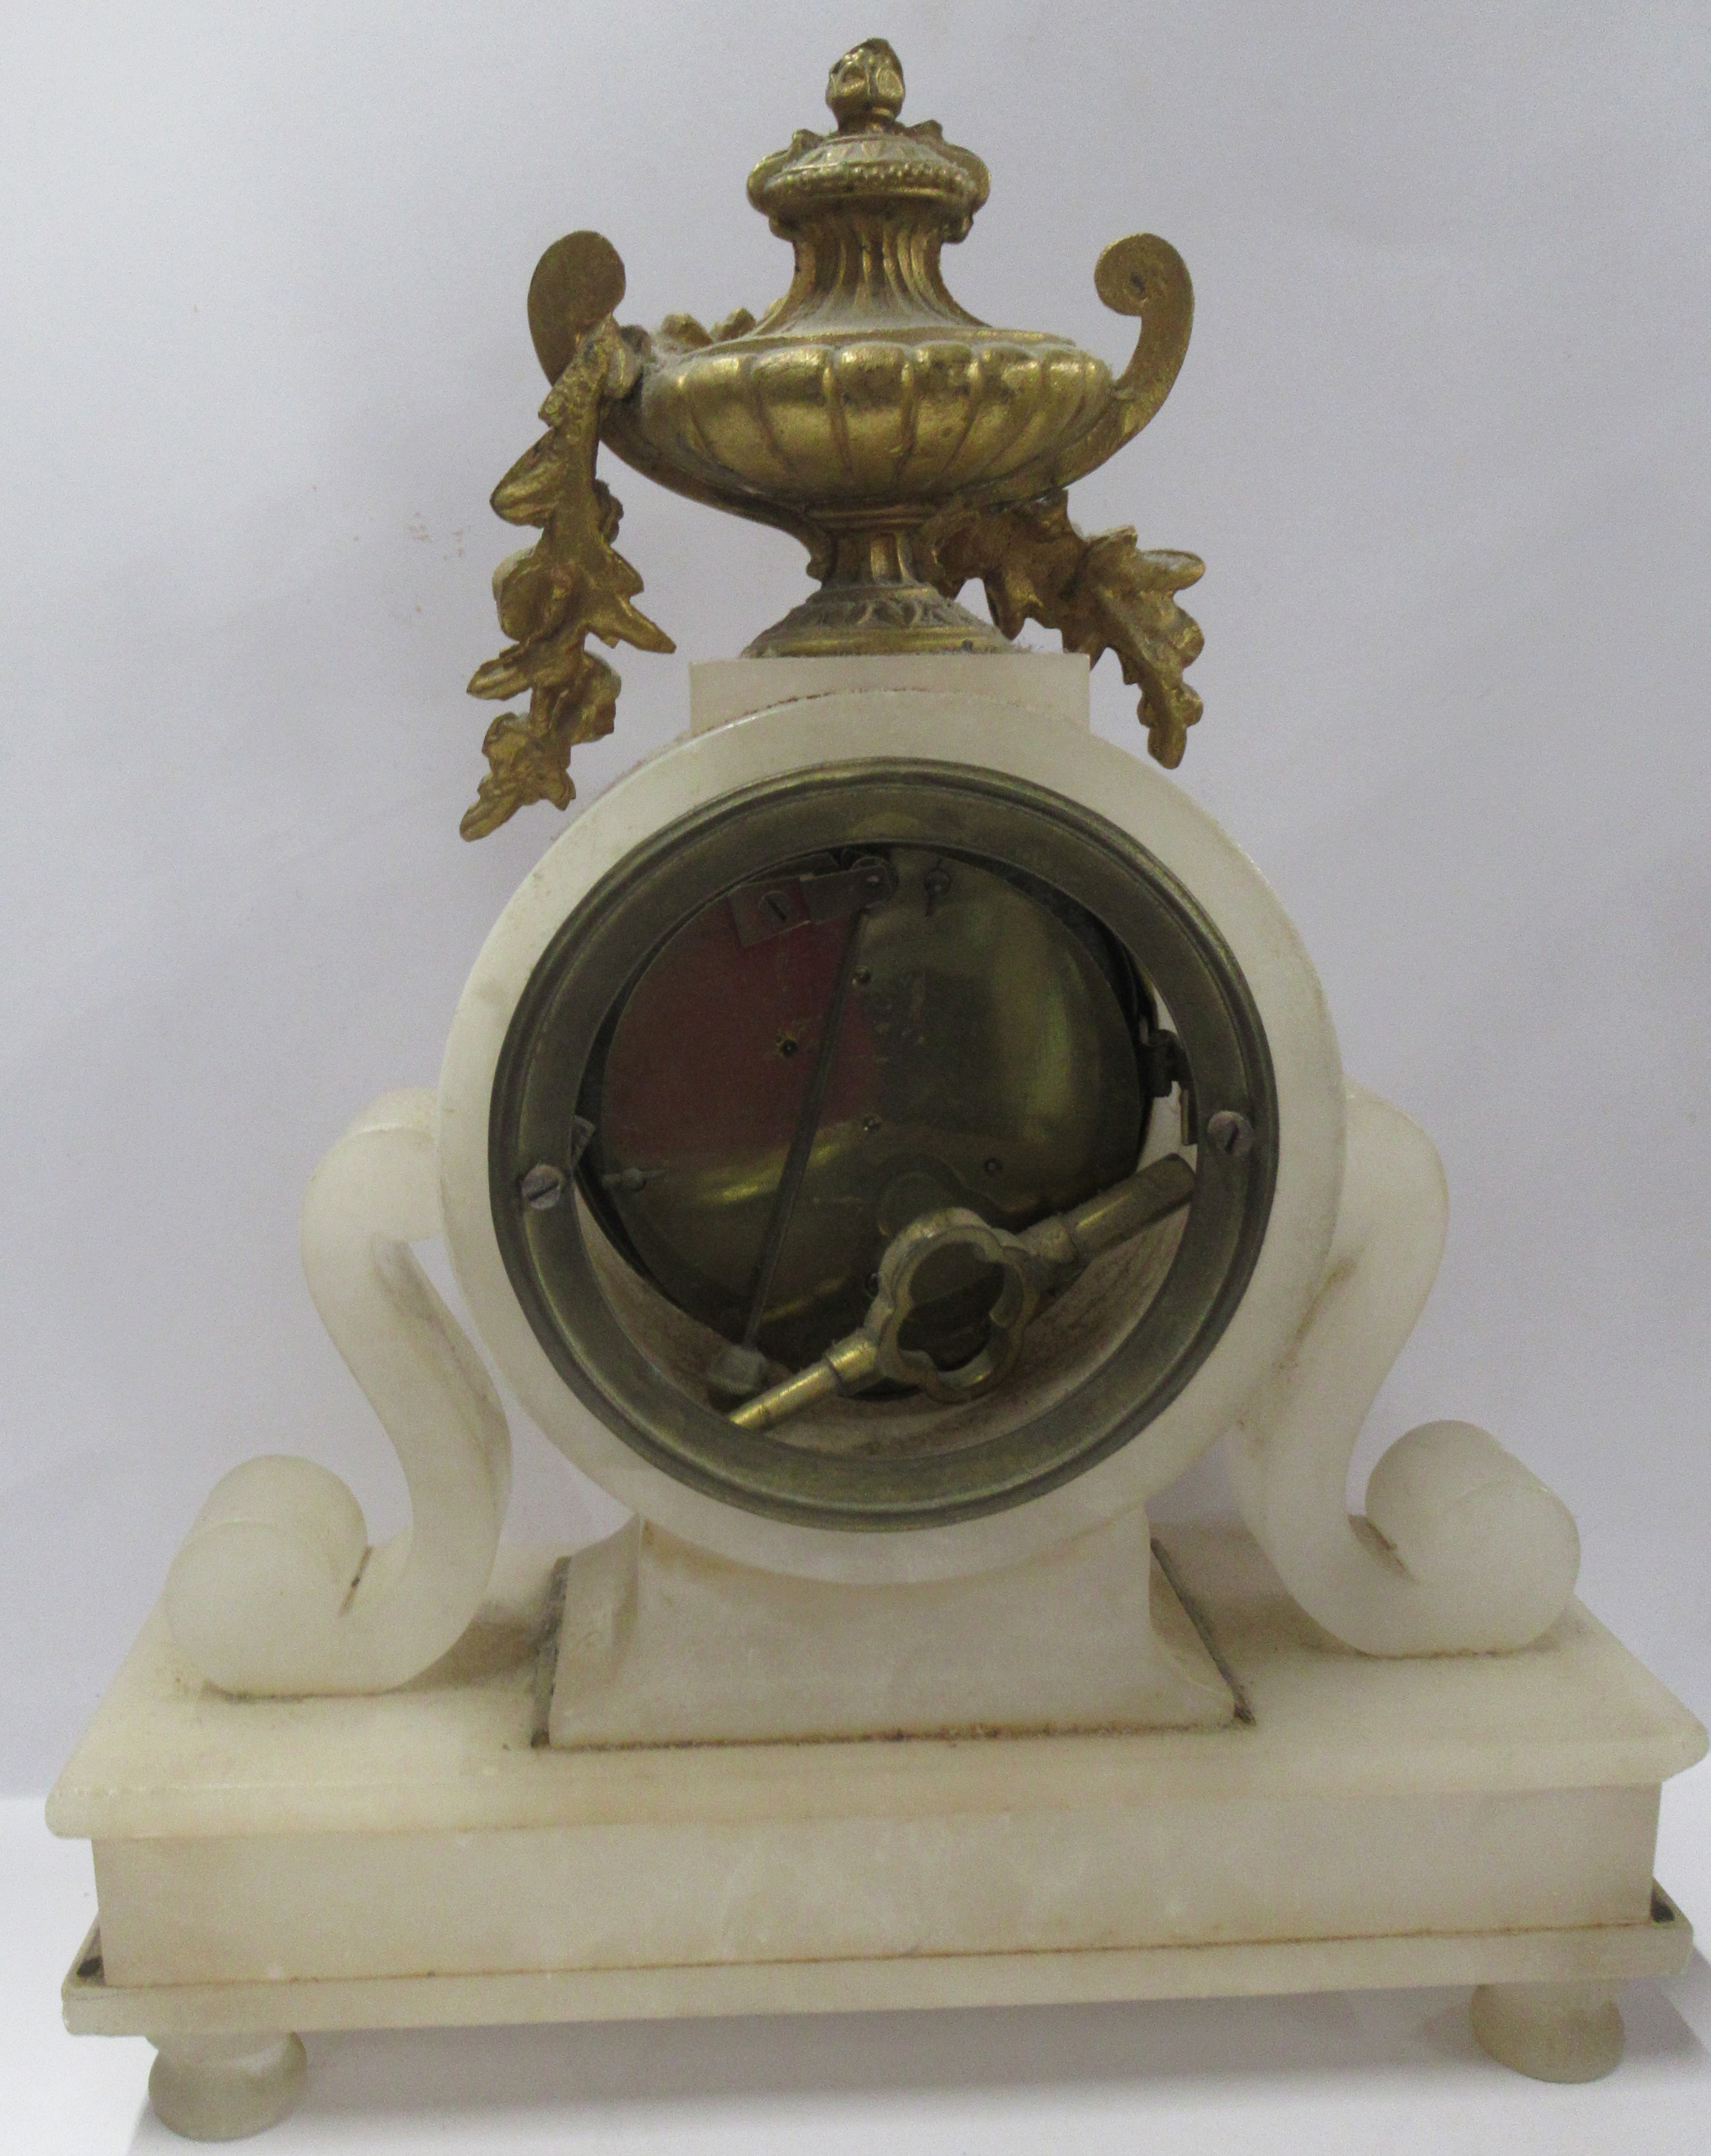 A 19th century marble cased mantel clock, with gilt metal urn and swag decoration, height 10.5ins - Image 2 of 3